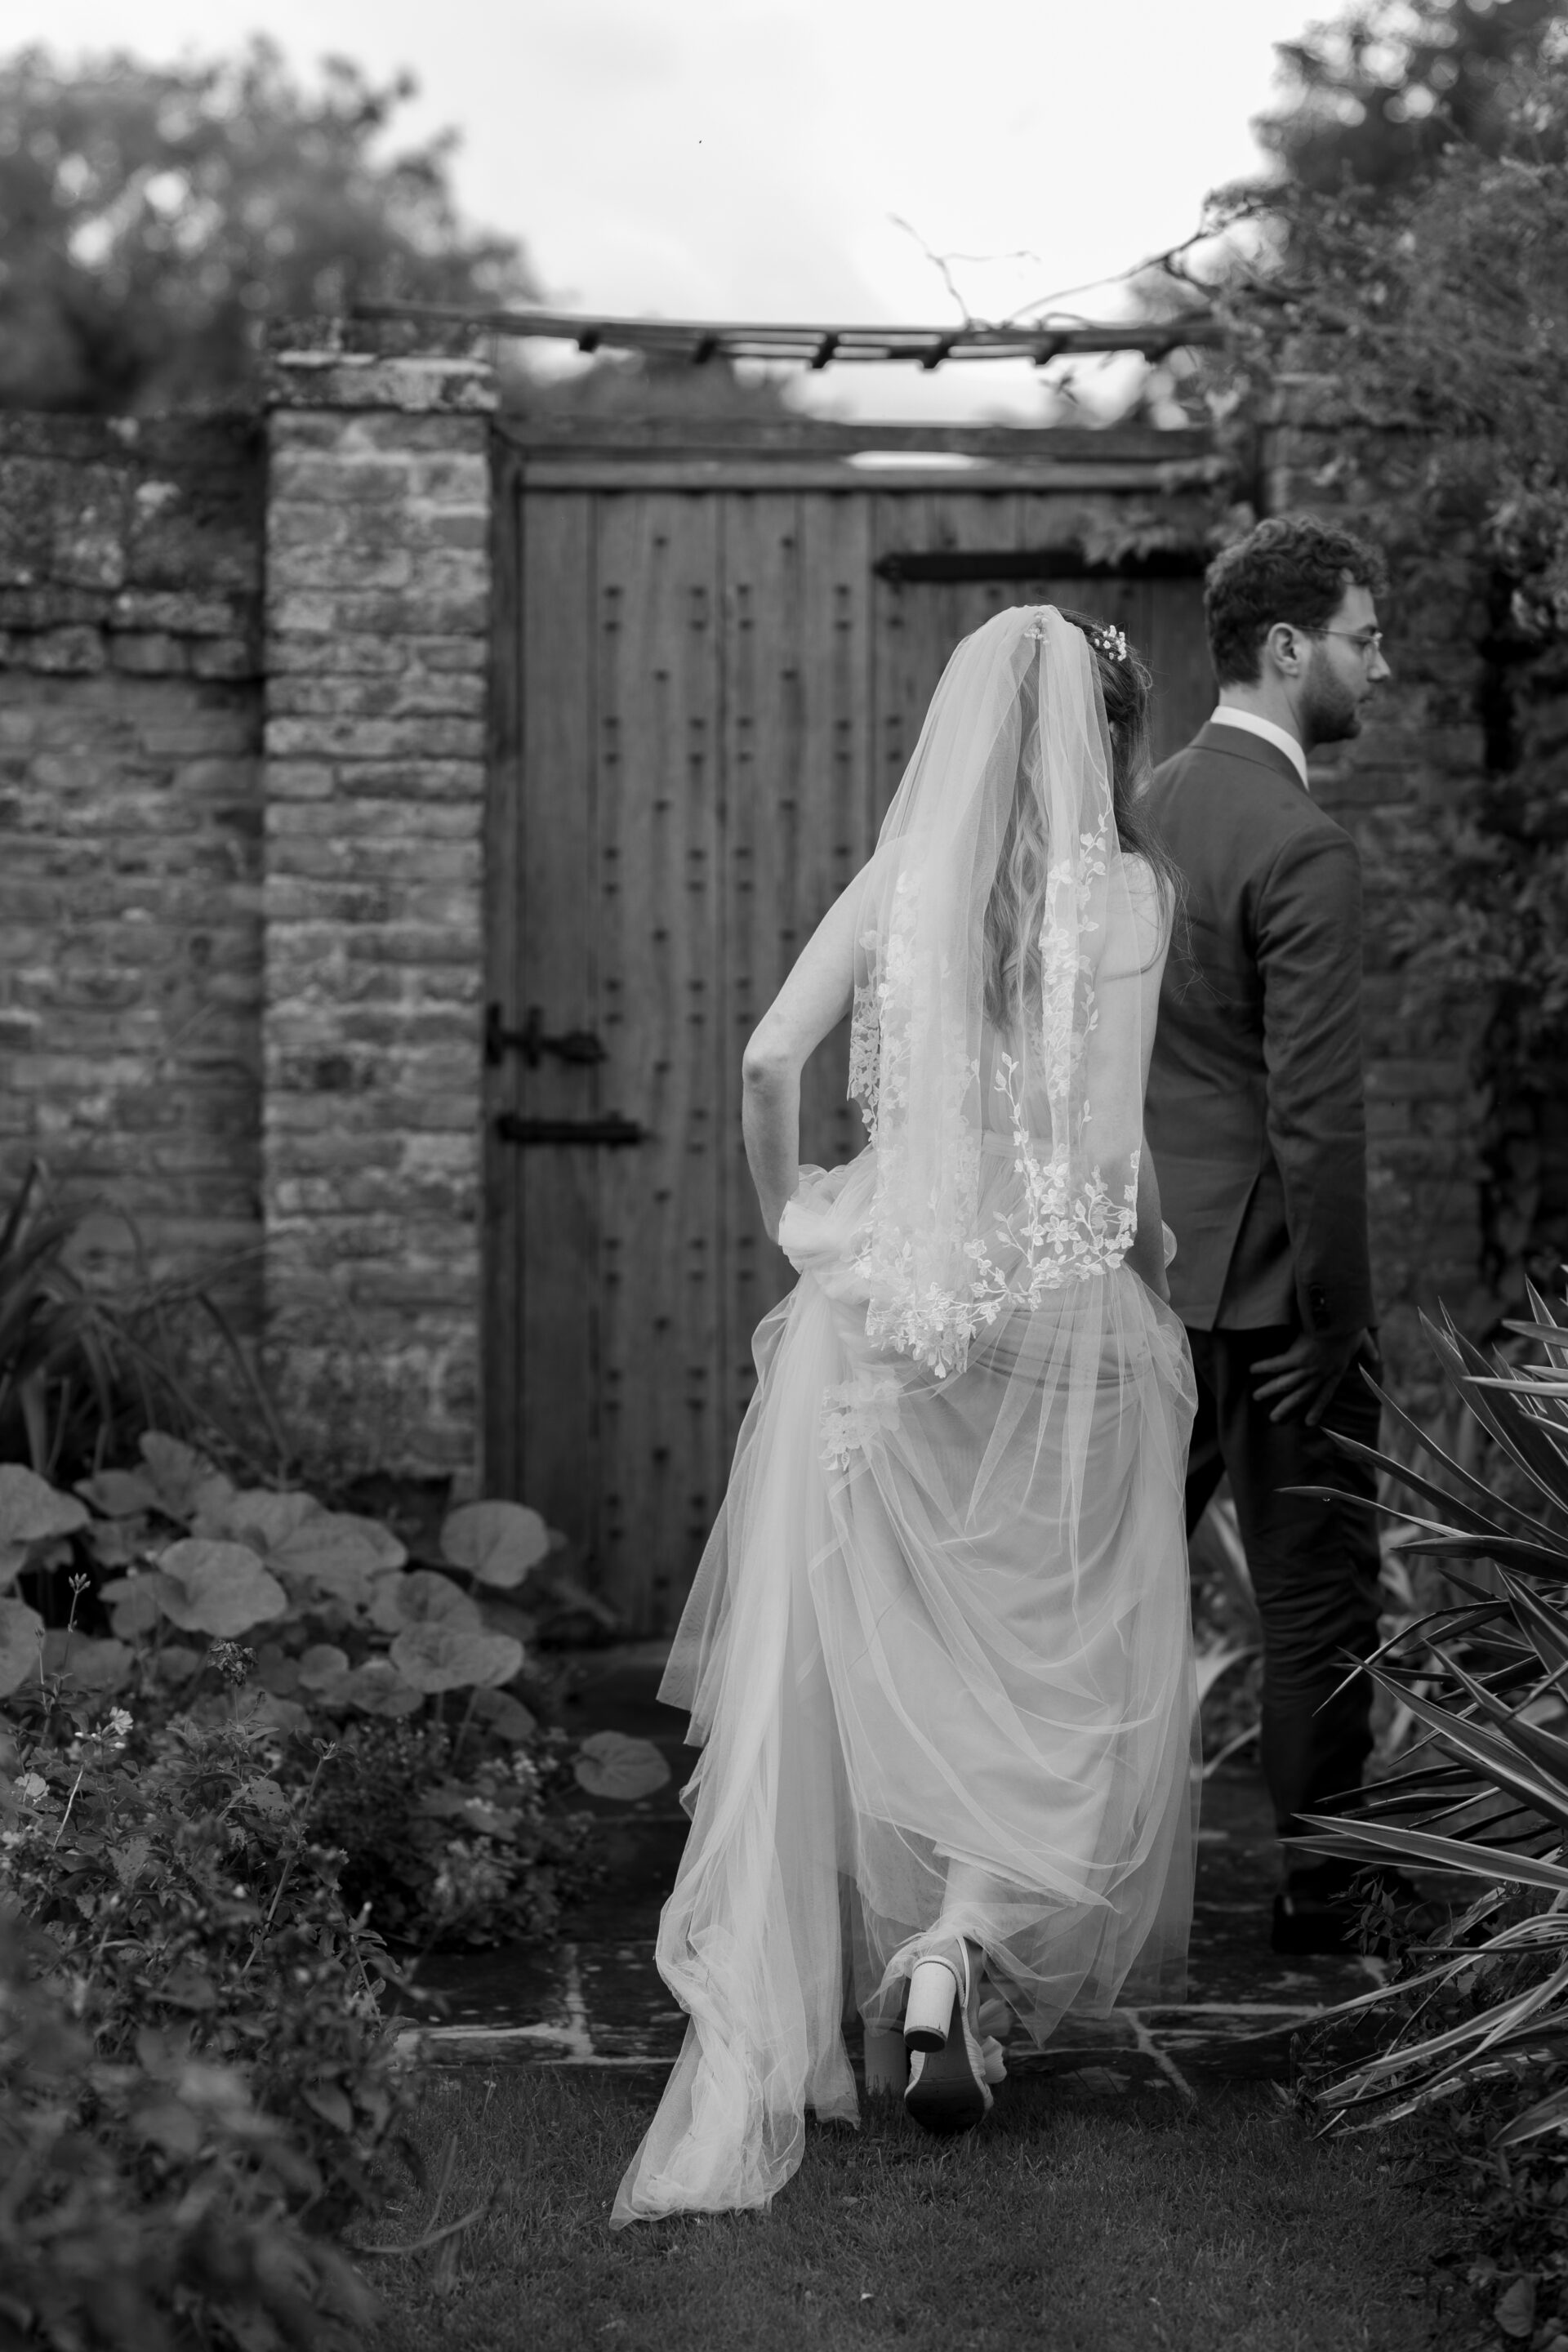 A candid portrait of the bride and groom at the Wool Barn, Gloucestershire wedding venue in Frampton